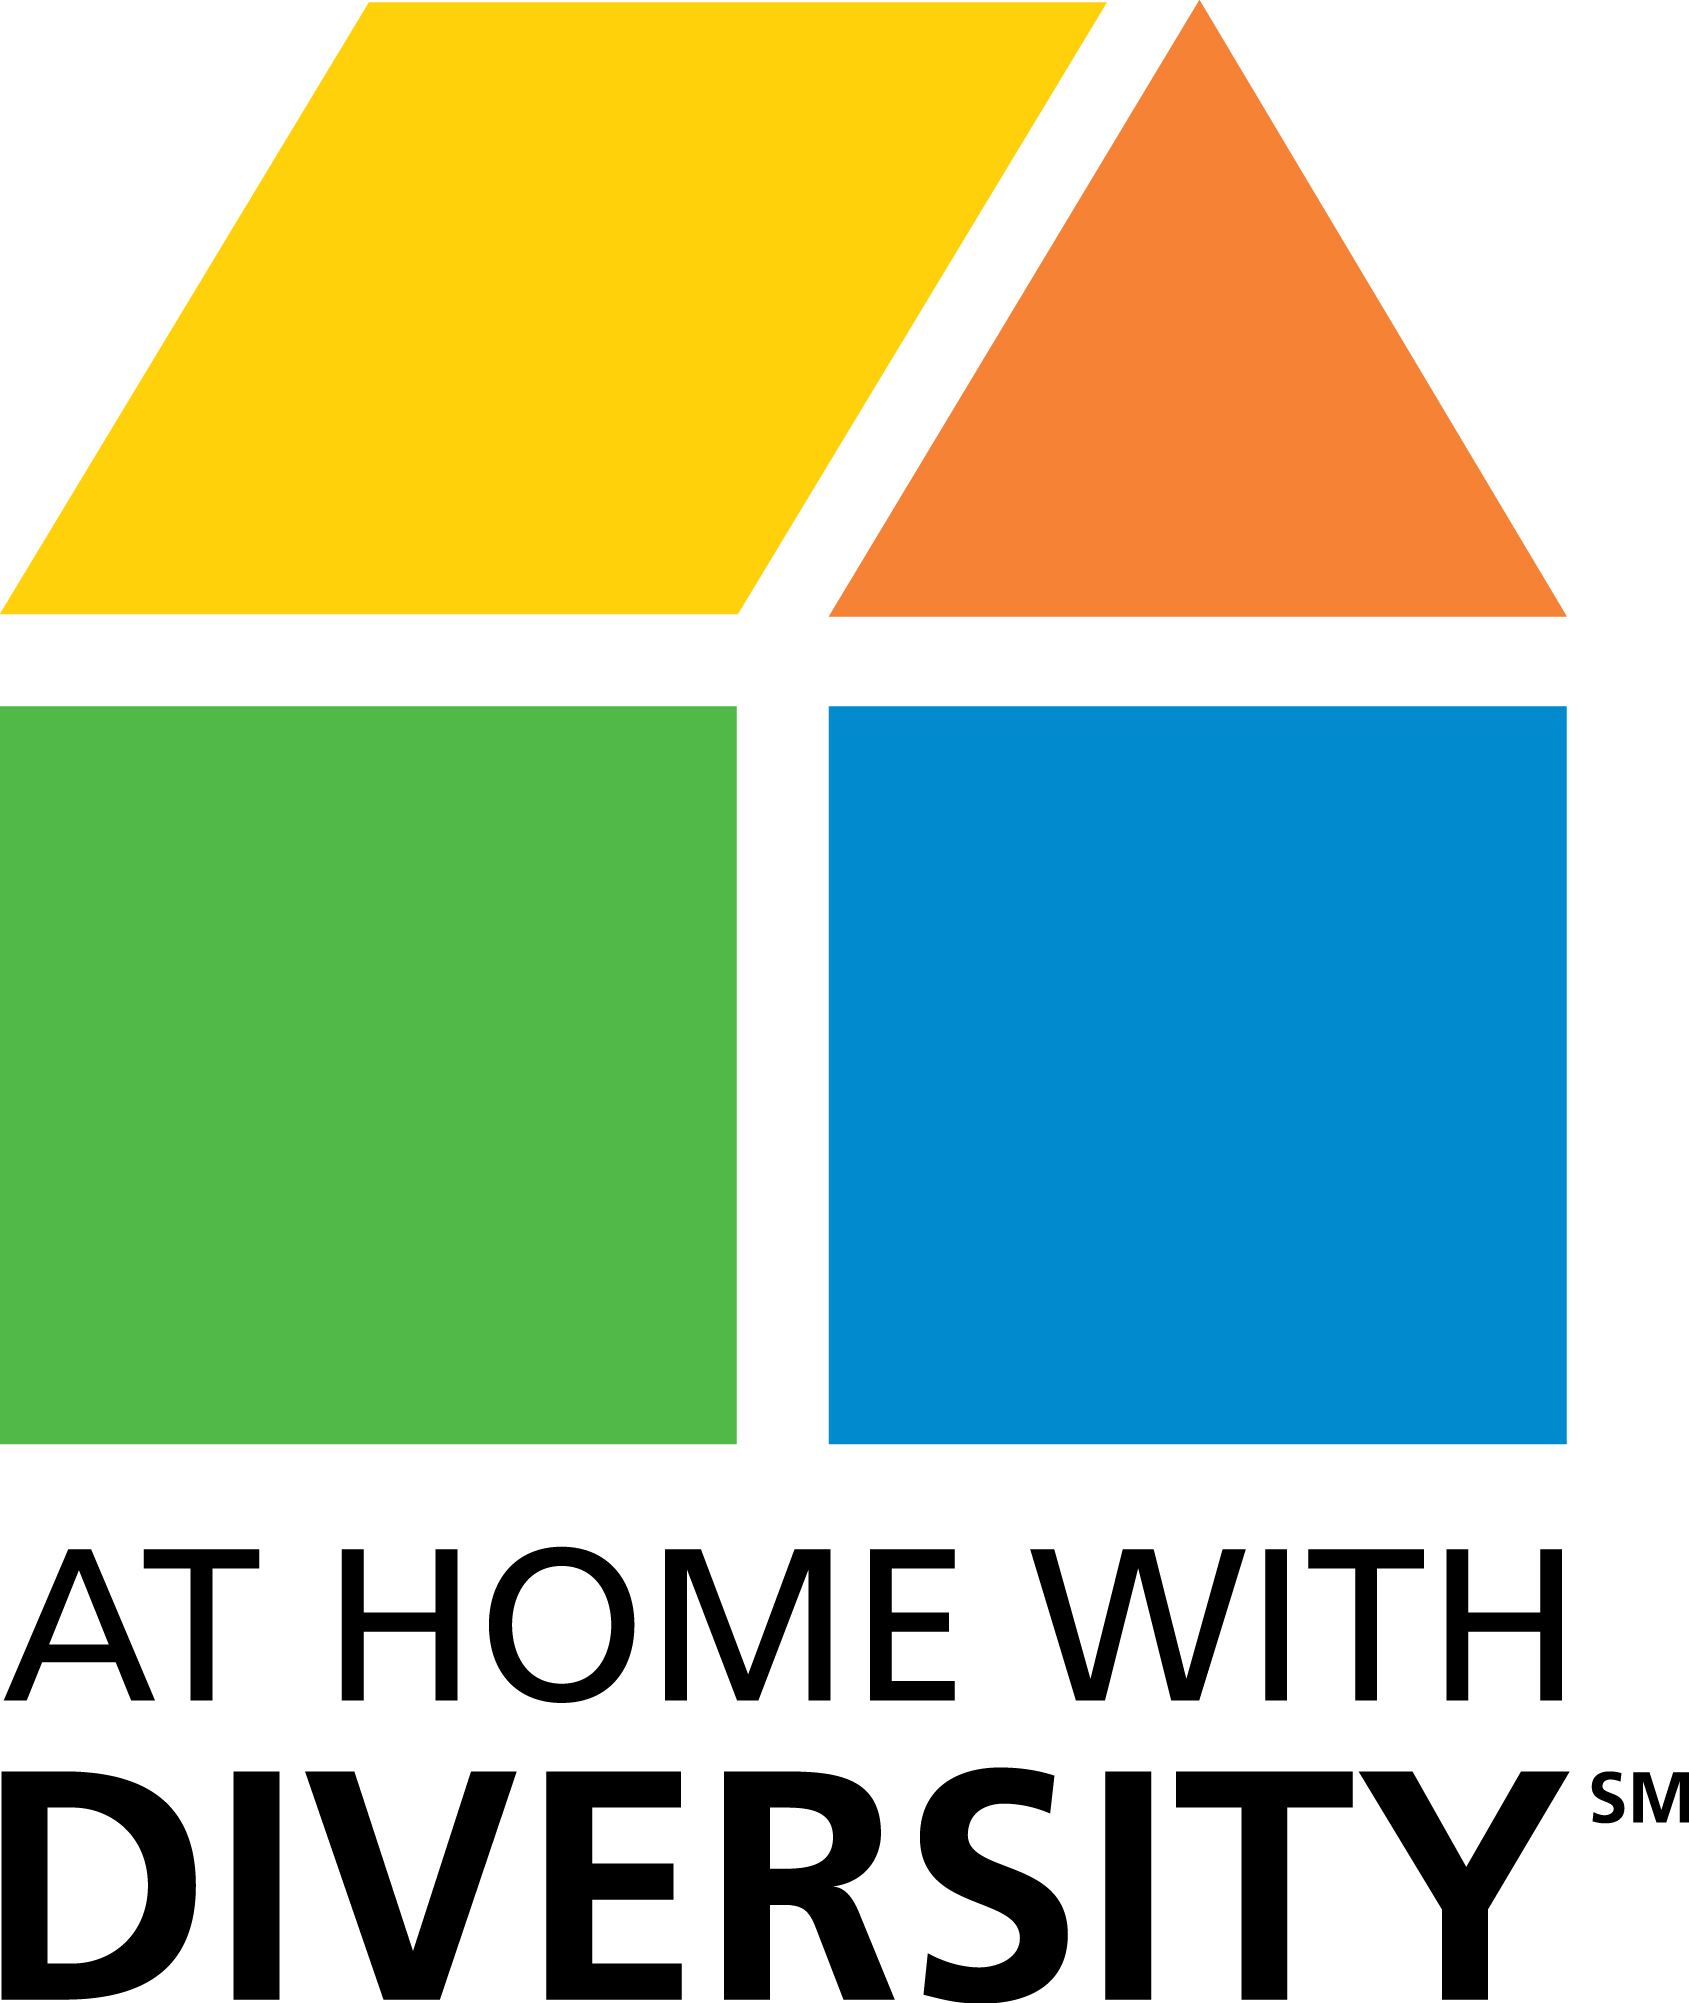 http://www.realtor.org/sites/default/files/images/logos/NAR/At-Home-with-Diversity-Logo-web.jpg